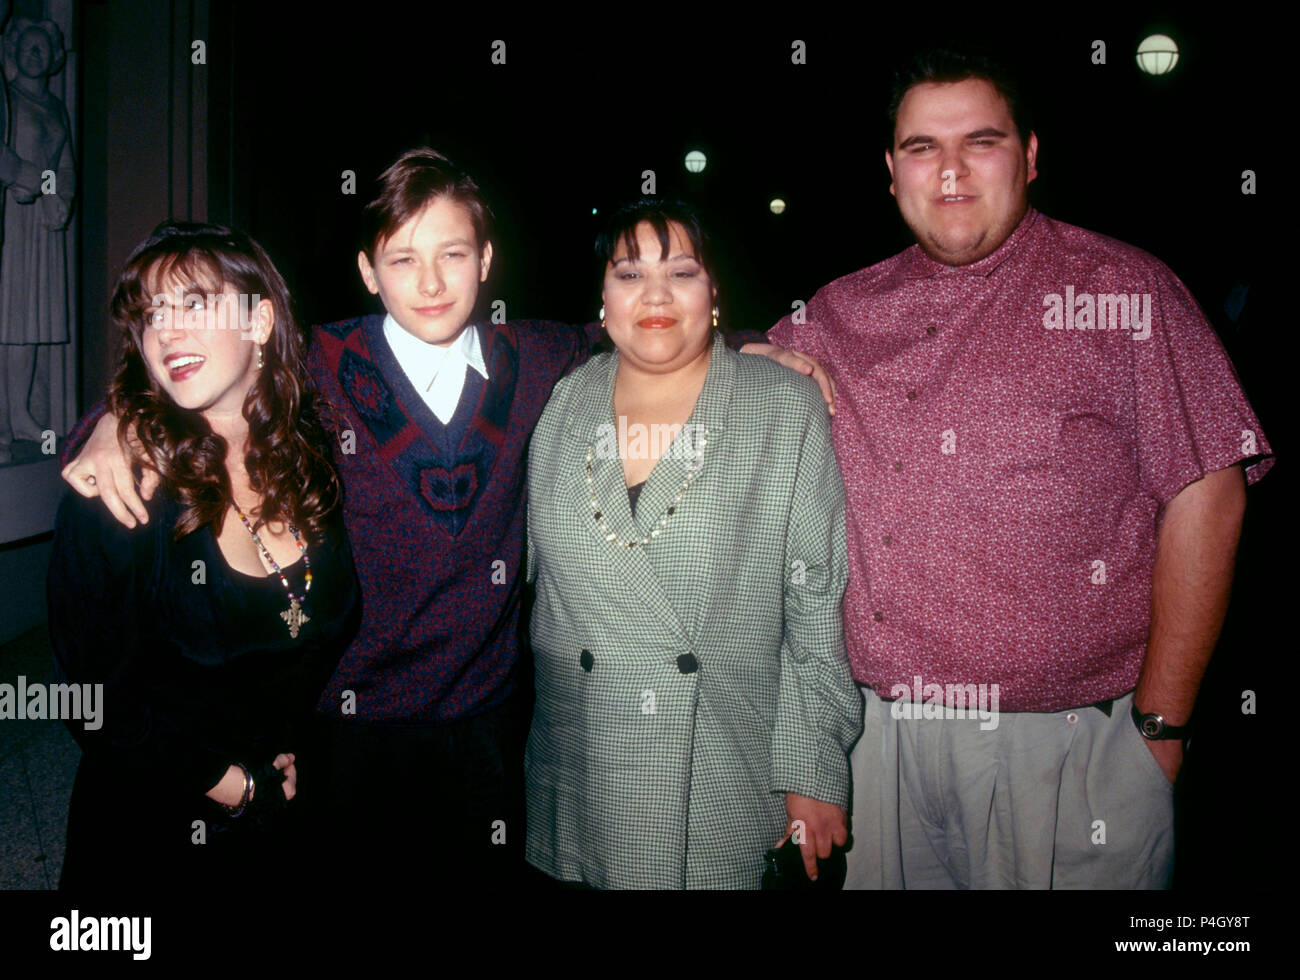 LOS ANGELES, CA - NOVEMBER 13: (L-R) Actress Soleil Moon Frye, actor Edward Furlong and guests attend 'And You Thought Your Parents Were Weird' on November 13, 1991 at the Beverly Connection in Los Angeles, California. Photo by Barry King/Alamy Stock Photo Stock Photo